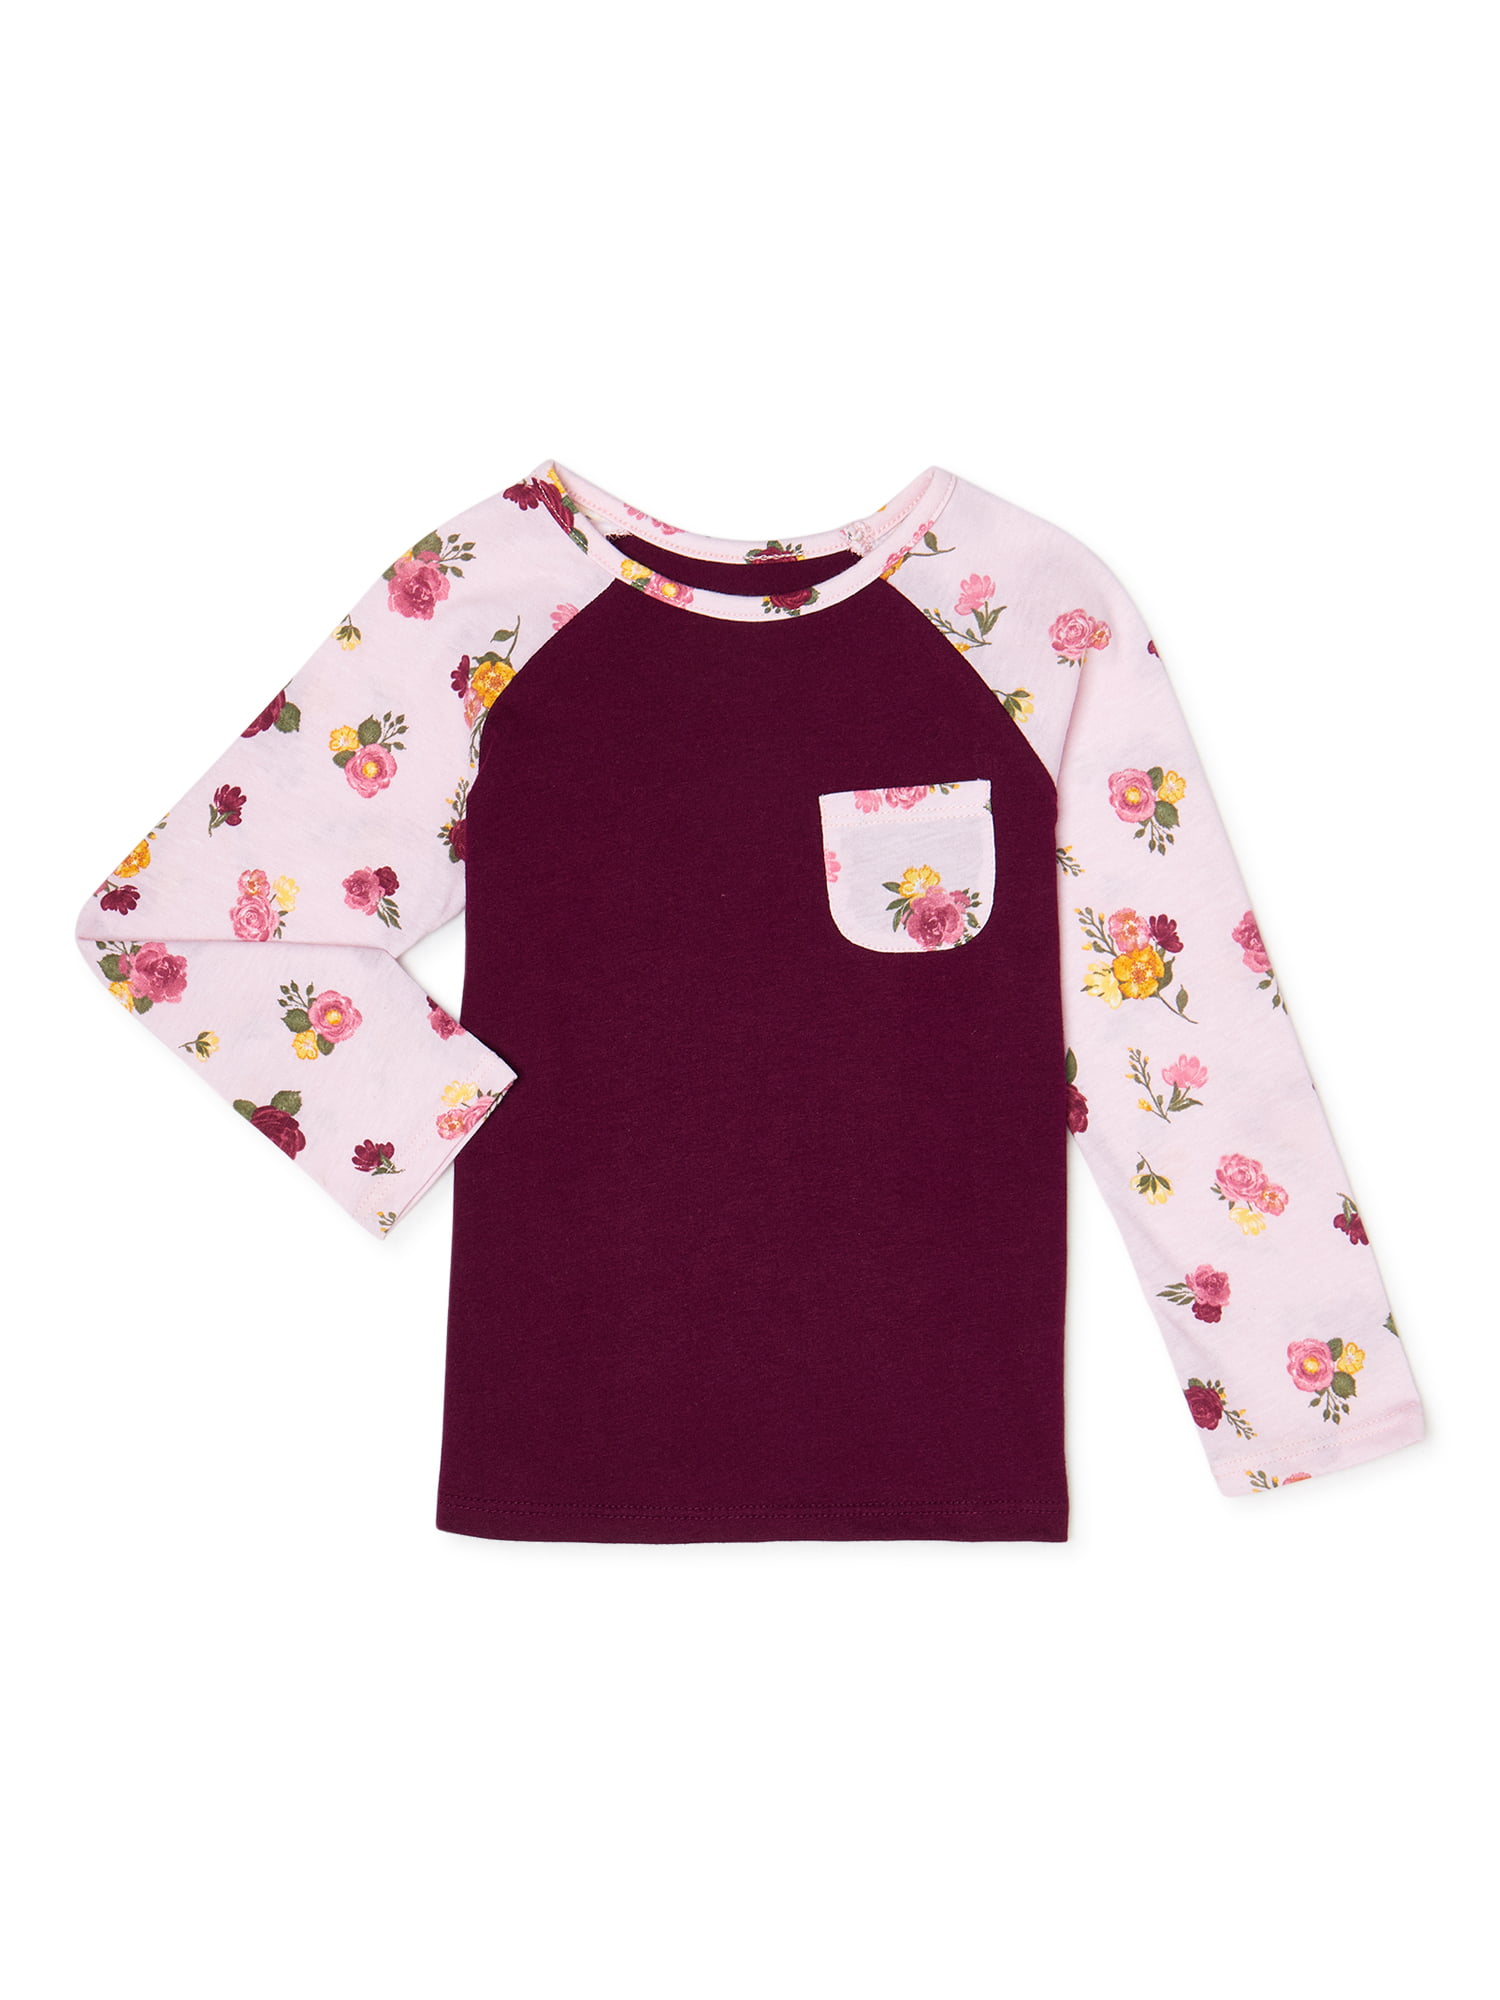 Kumary Toddler Little Girls Tees 3-Pack Long Sleeve T Shirts for 2-6 Years